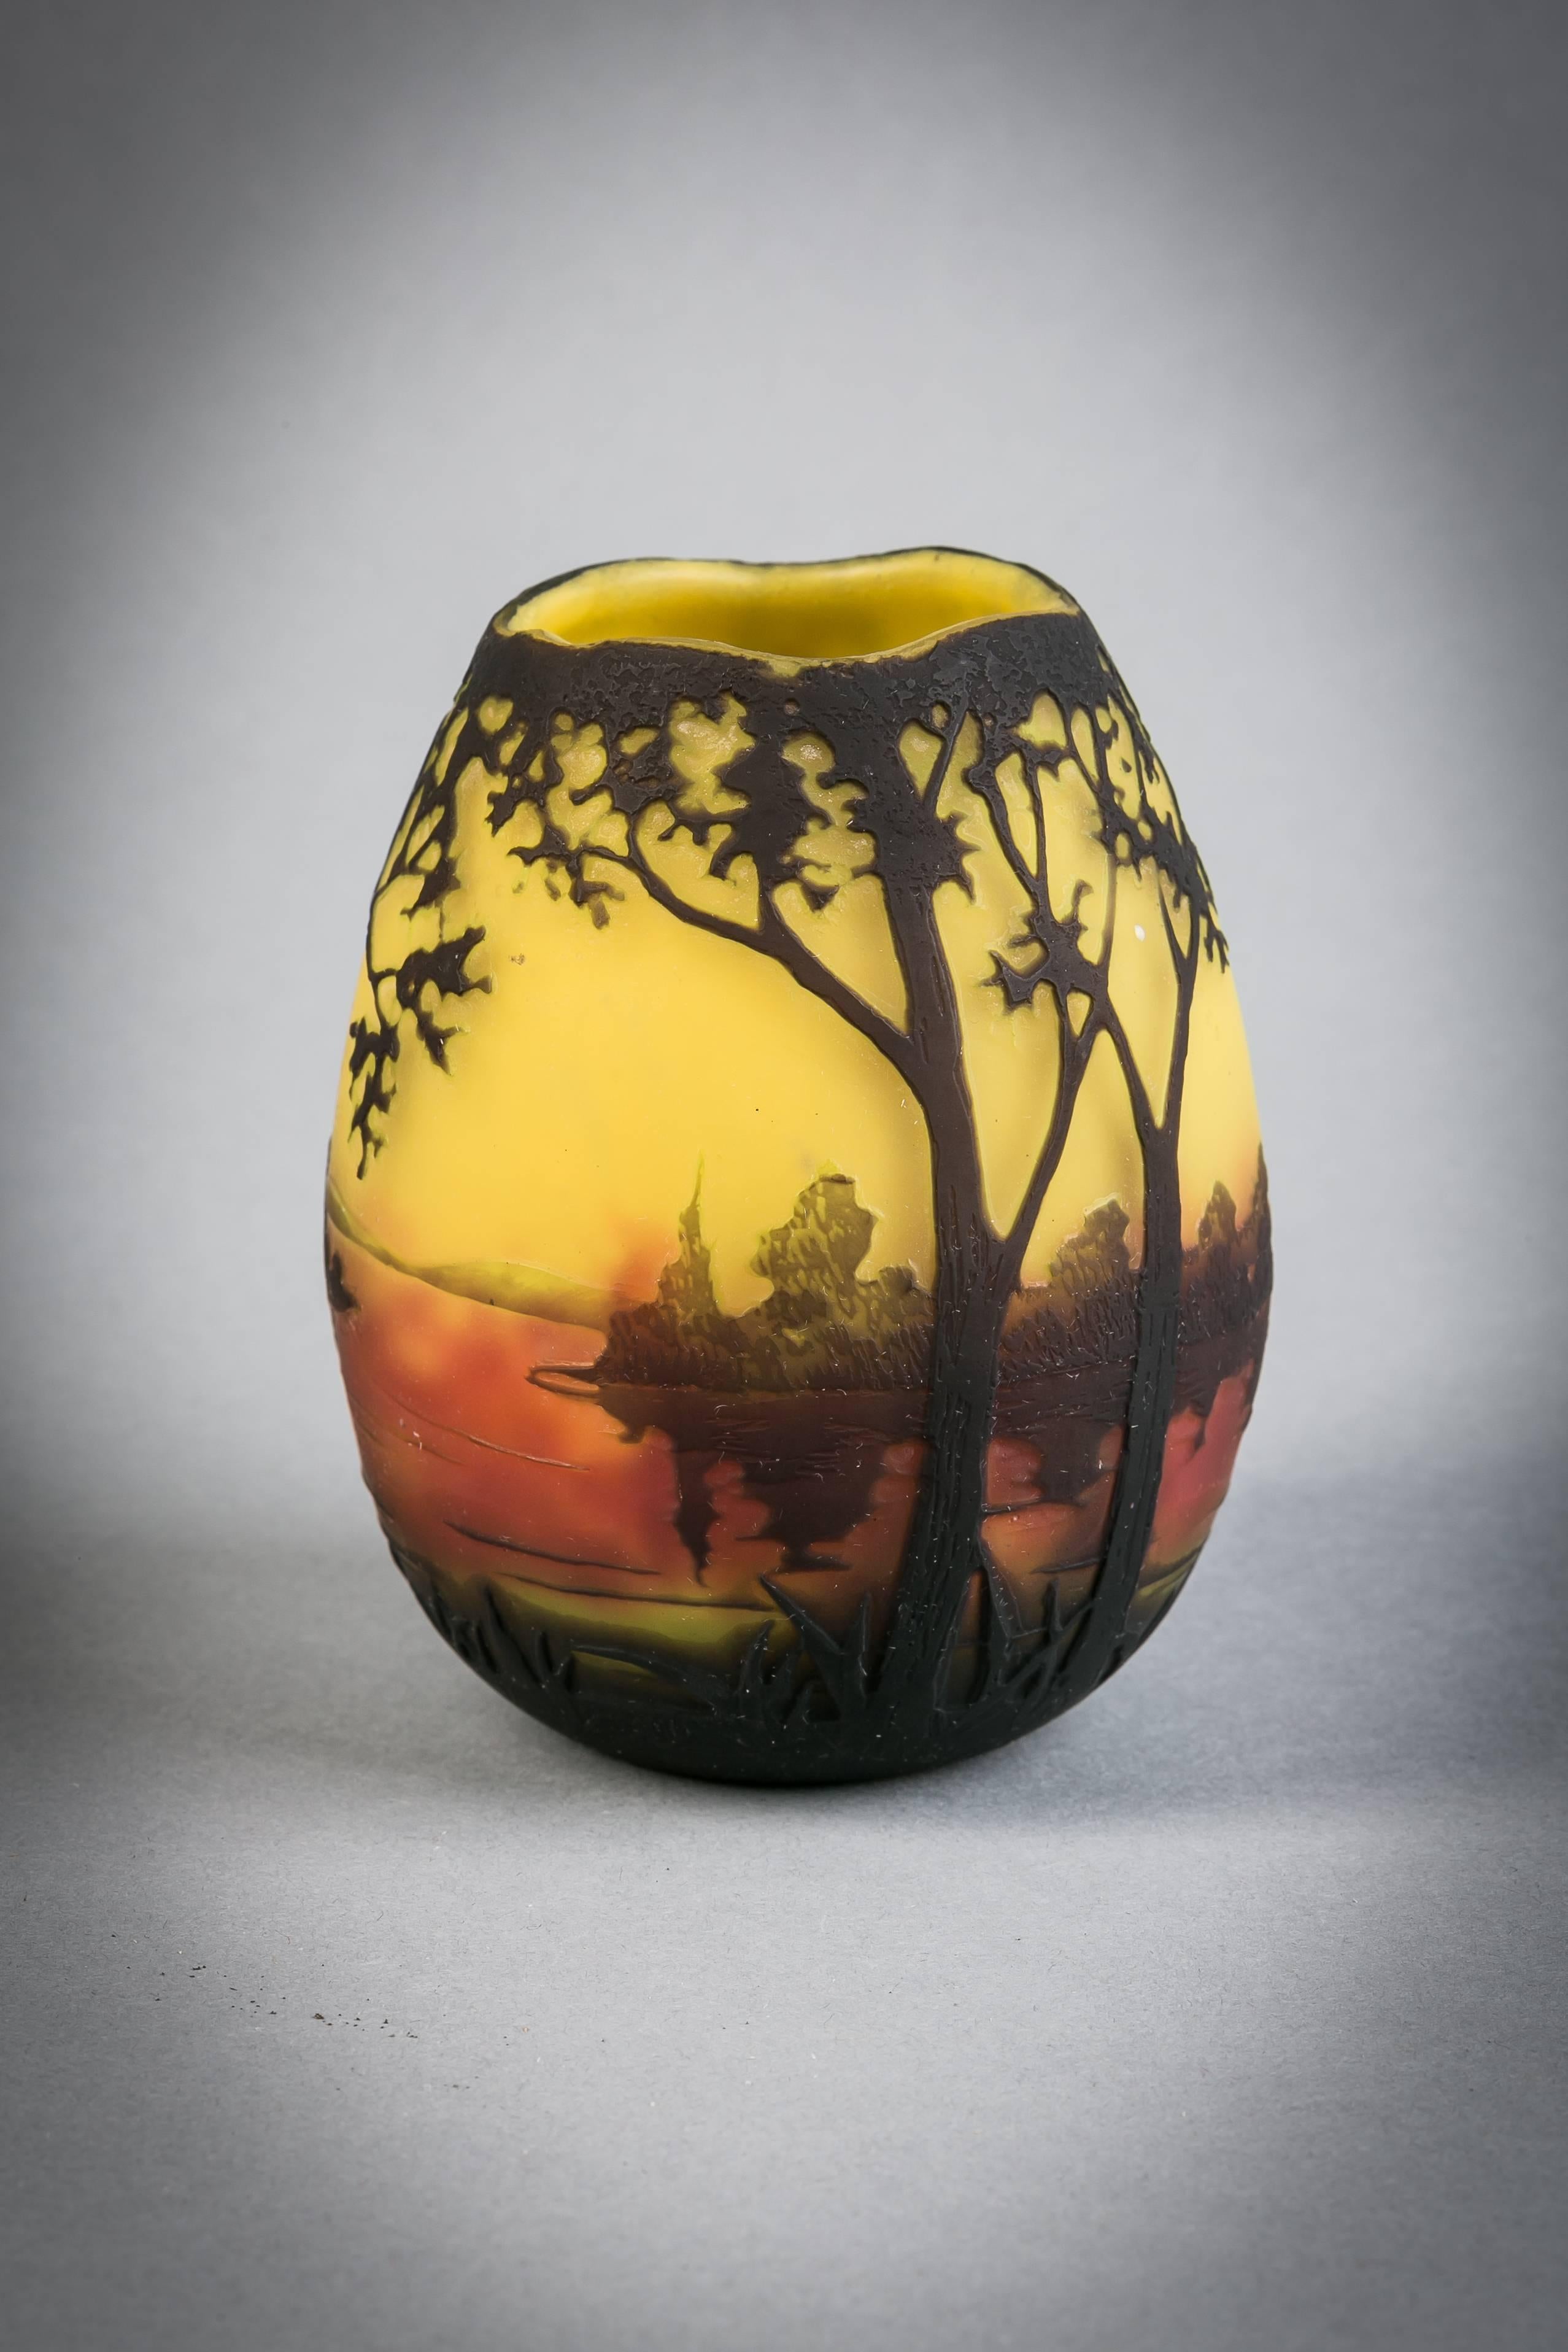 Landscape vase. Signed Daum Nacy with the Cross of Lorraine.